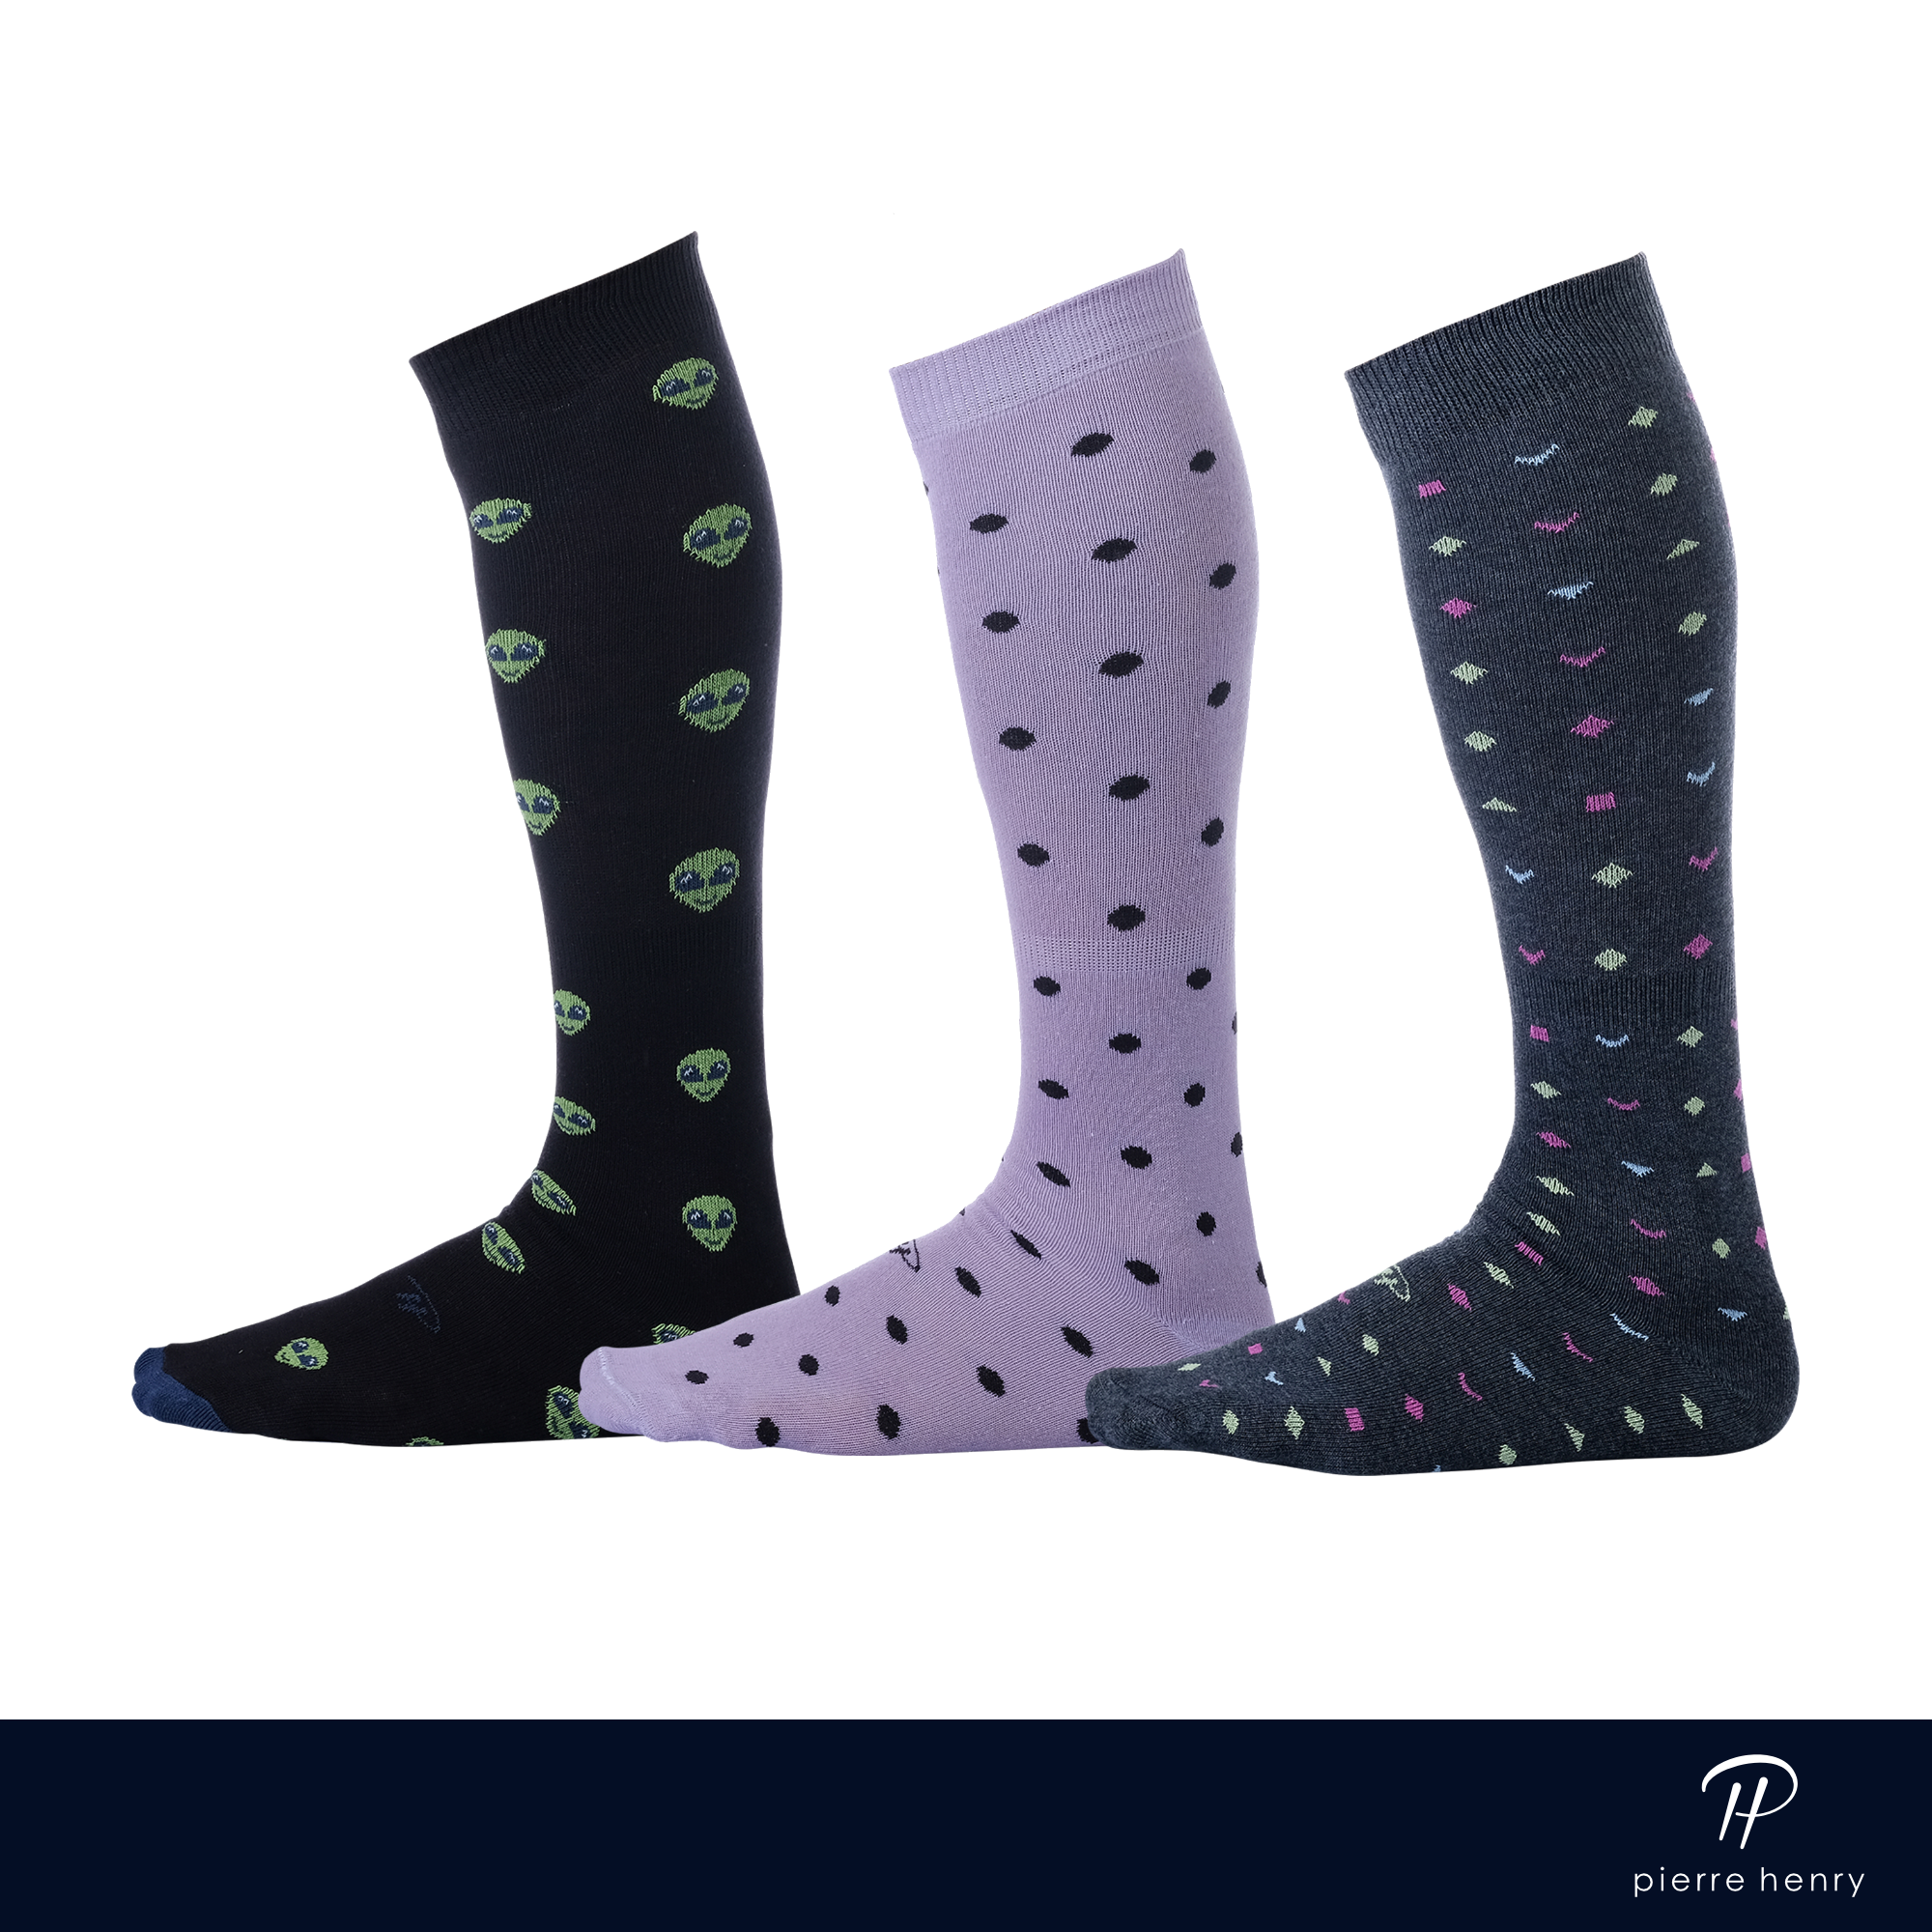 black dress socks with green aliens, light purple dress socks with black polka dots, grey dress socks with colored shapes